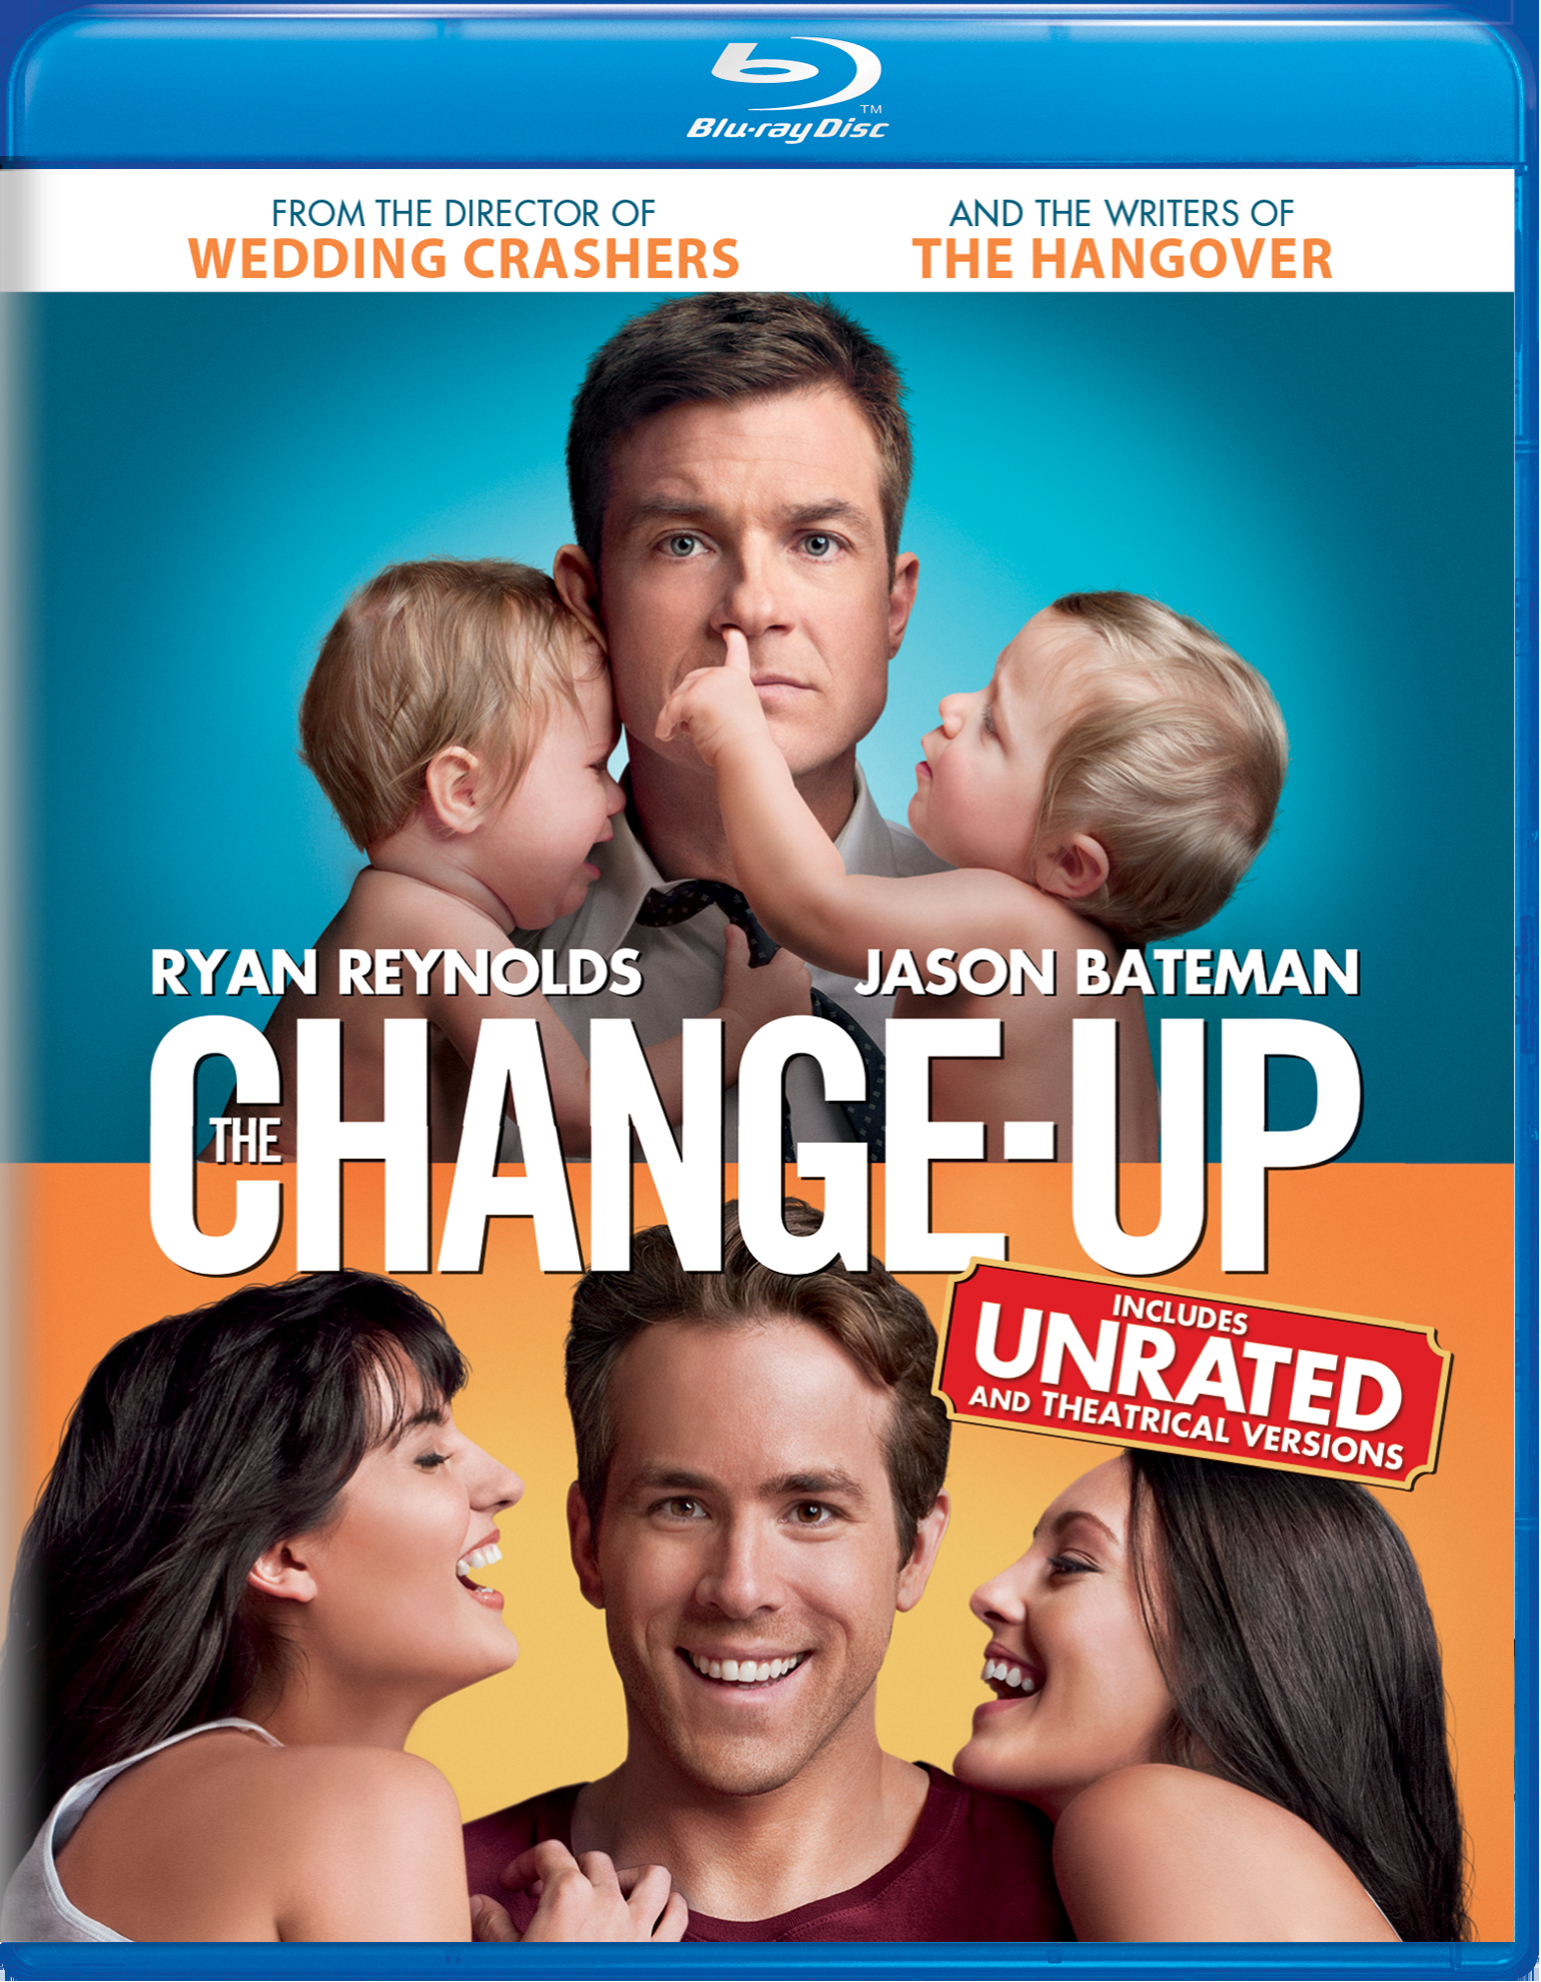 The Change-up (Blu-ray Unrated) - Blu-ray [ 2011 ]  - Comedy Movies On Blu-ray - Movies On GRUV